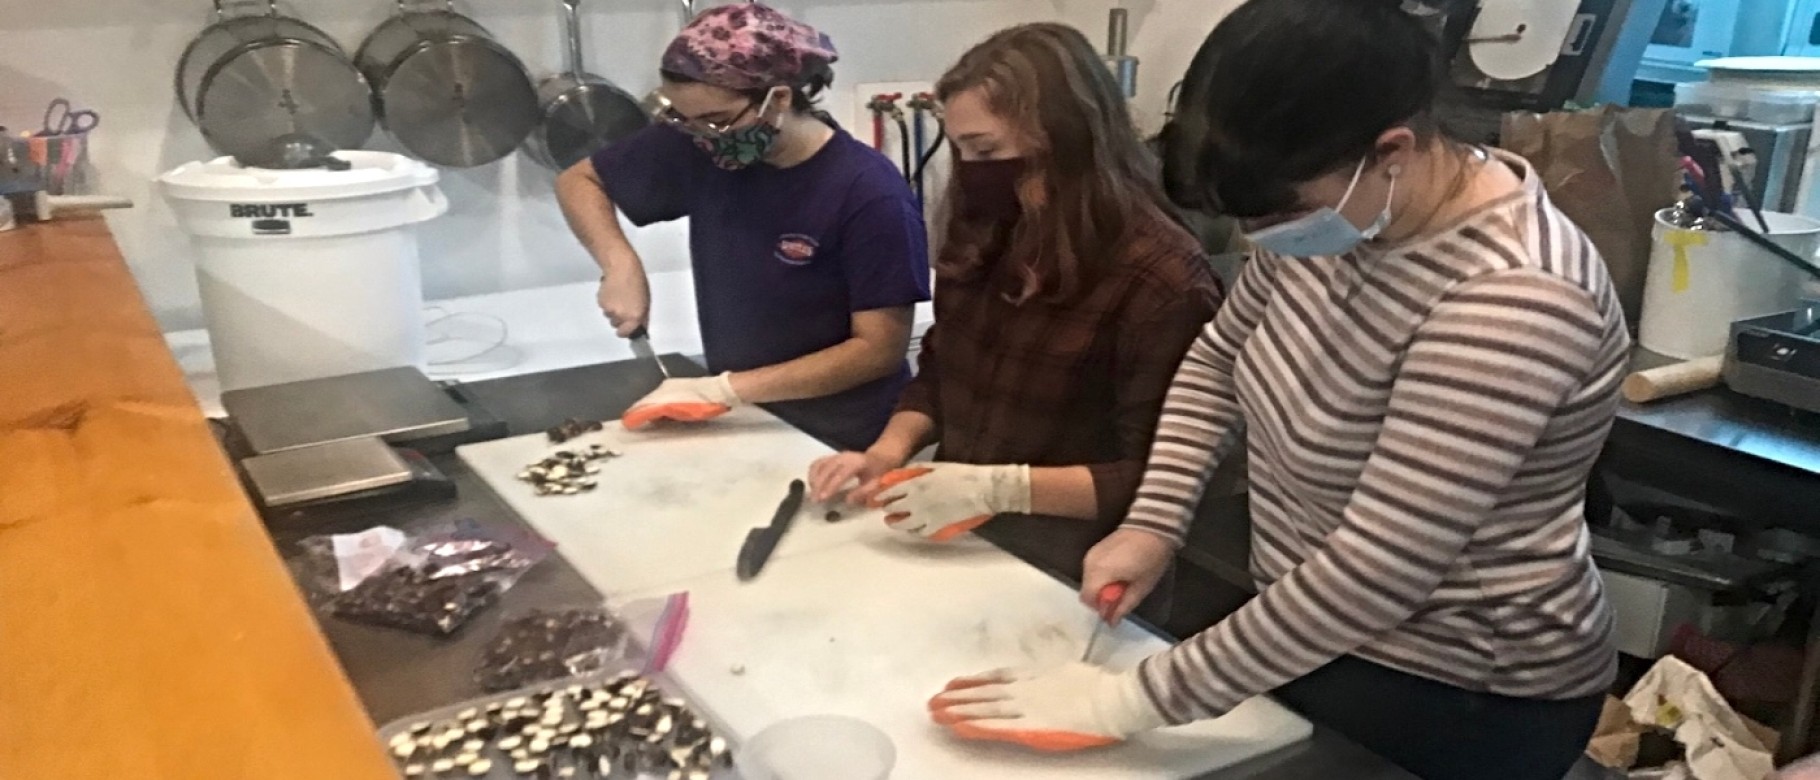 Students Virginia May, Kate Ganley, and Jocelyn LaClair remove chestnuts from their shells